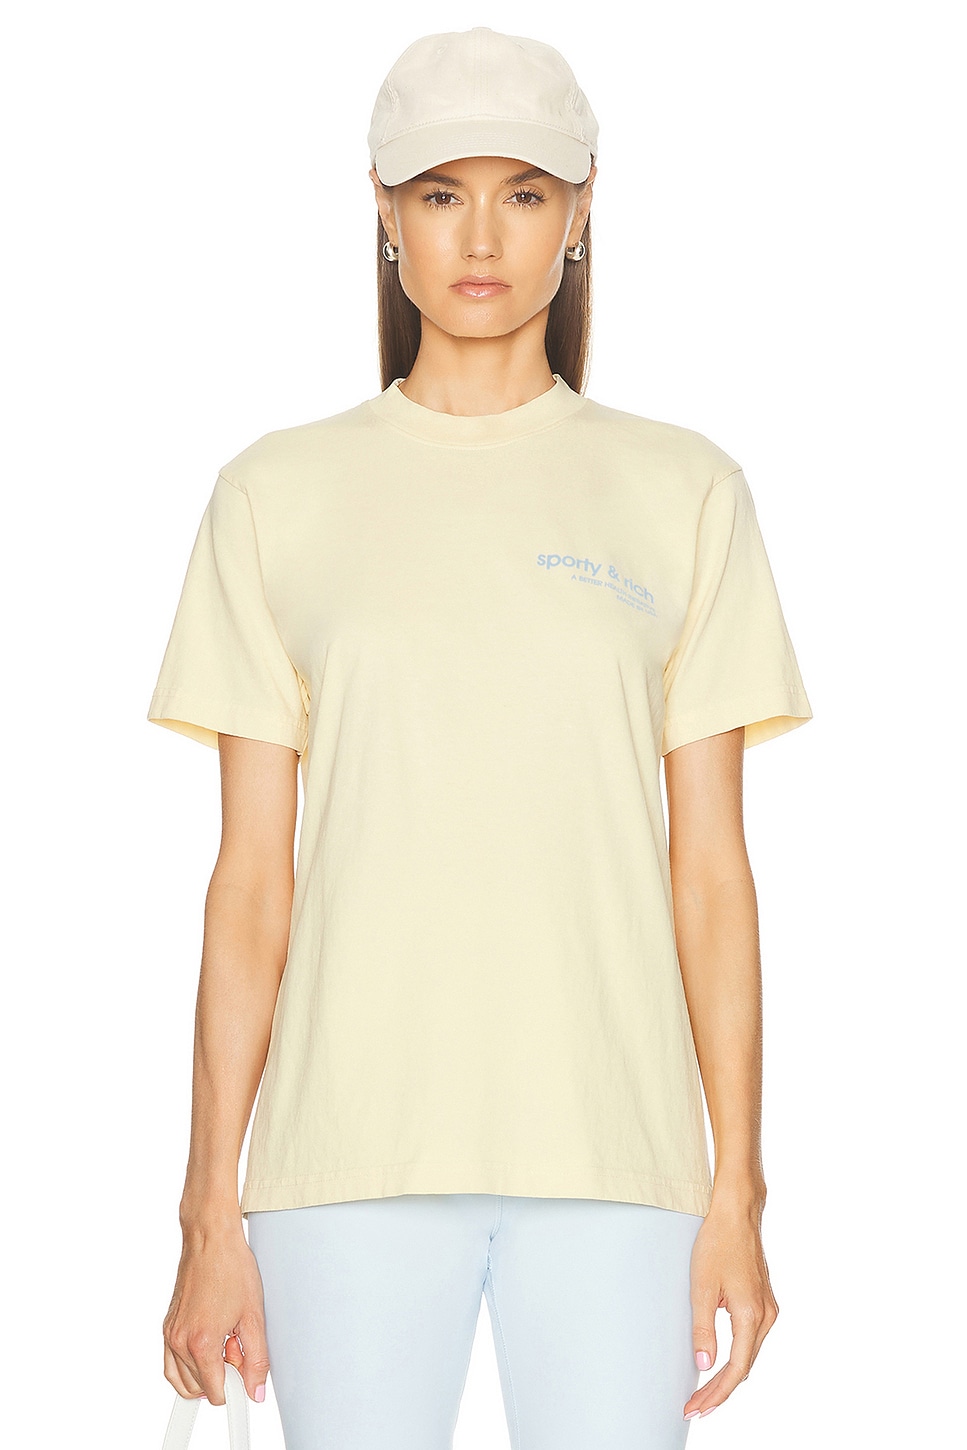 Image 1 of Sporty & Rich Usa Health Club T-Shirt in Almond & White